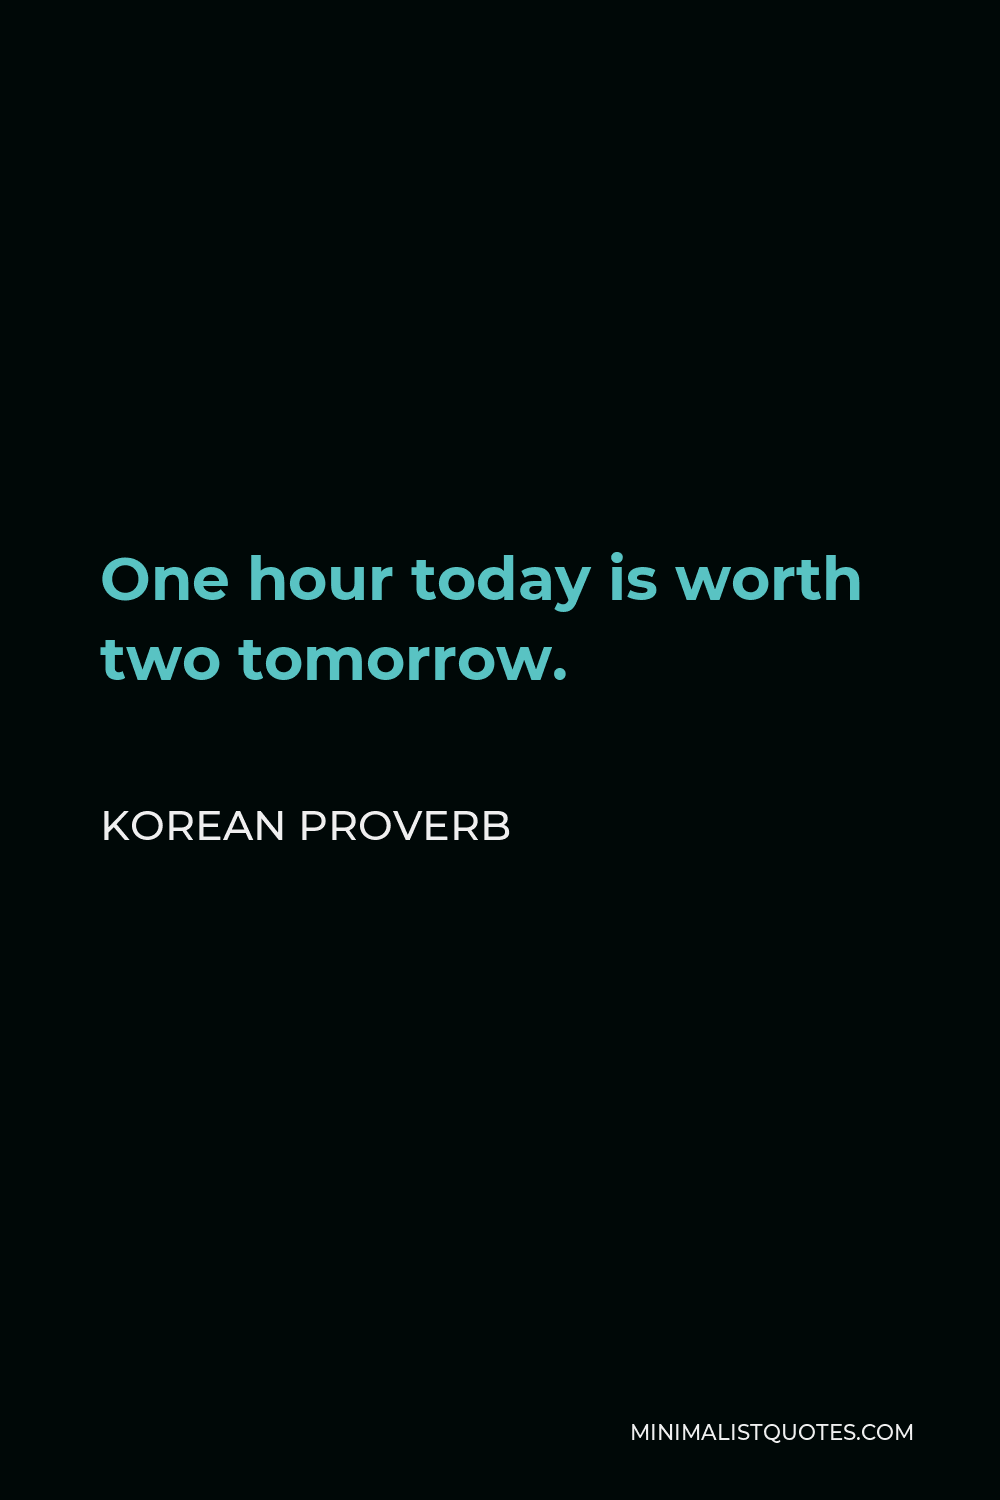 Korean Proverb Quote - One hour today is worth two tomorrow.